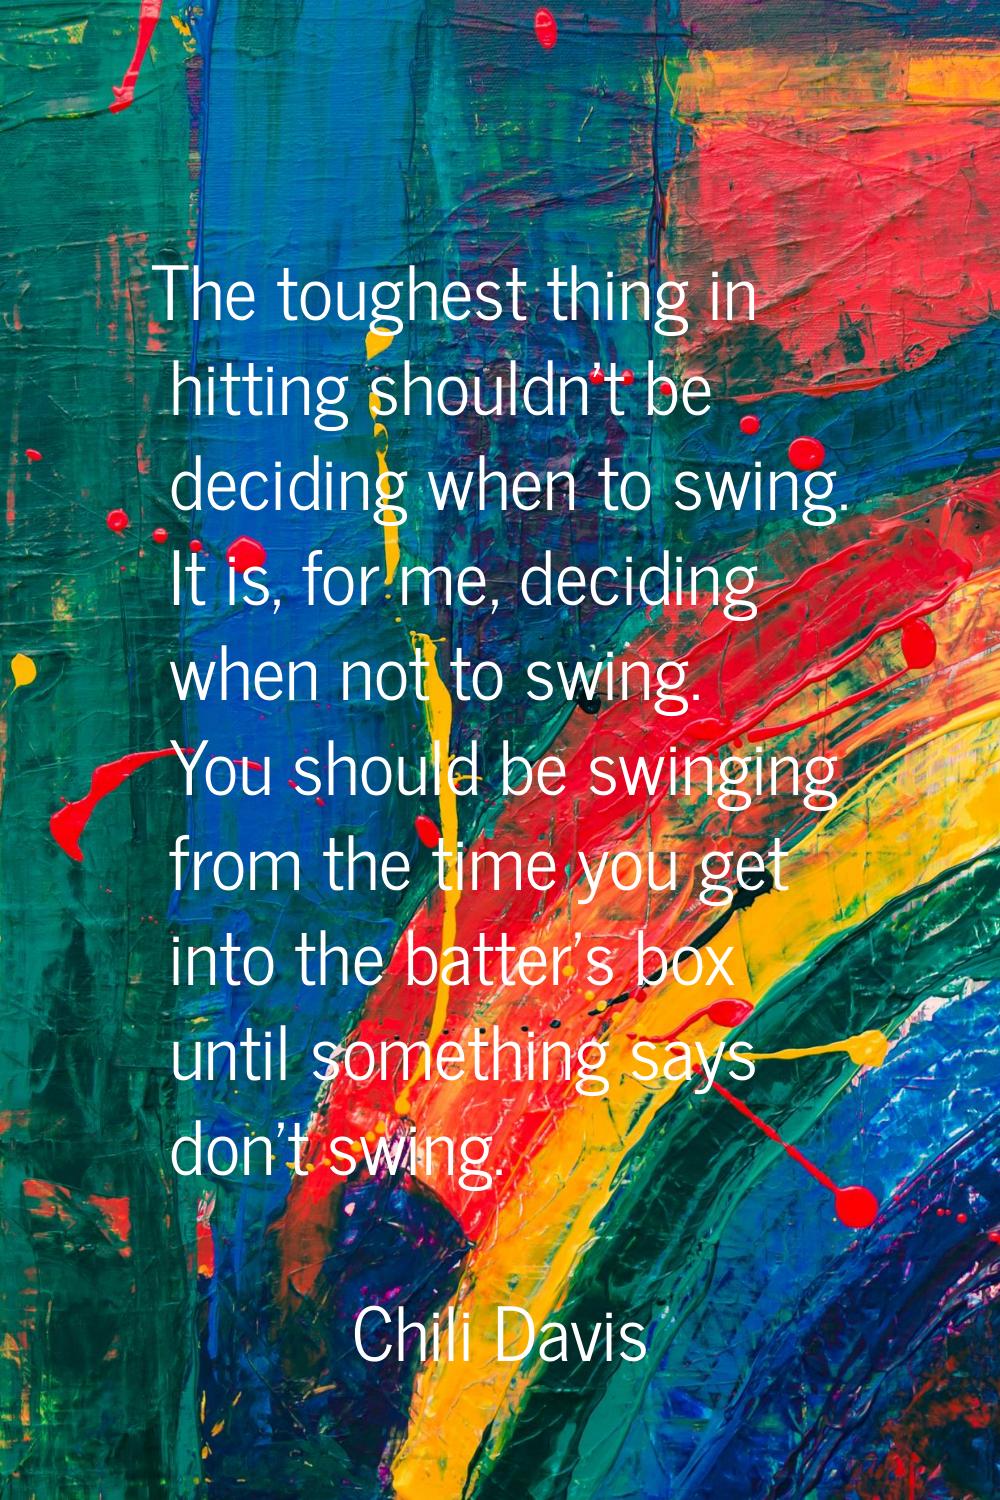 The toughest thing in hitting shouldn't be deciding when to swing. It is, for me, deciding when not